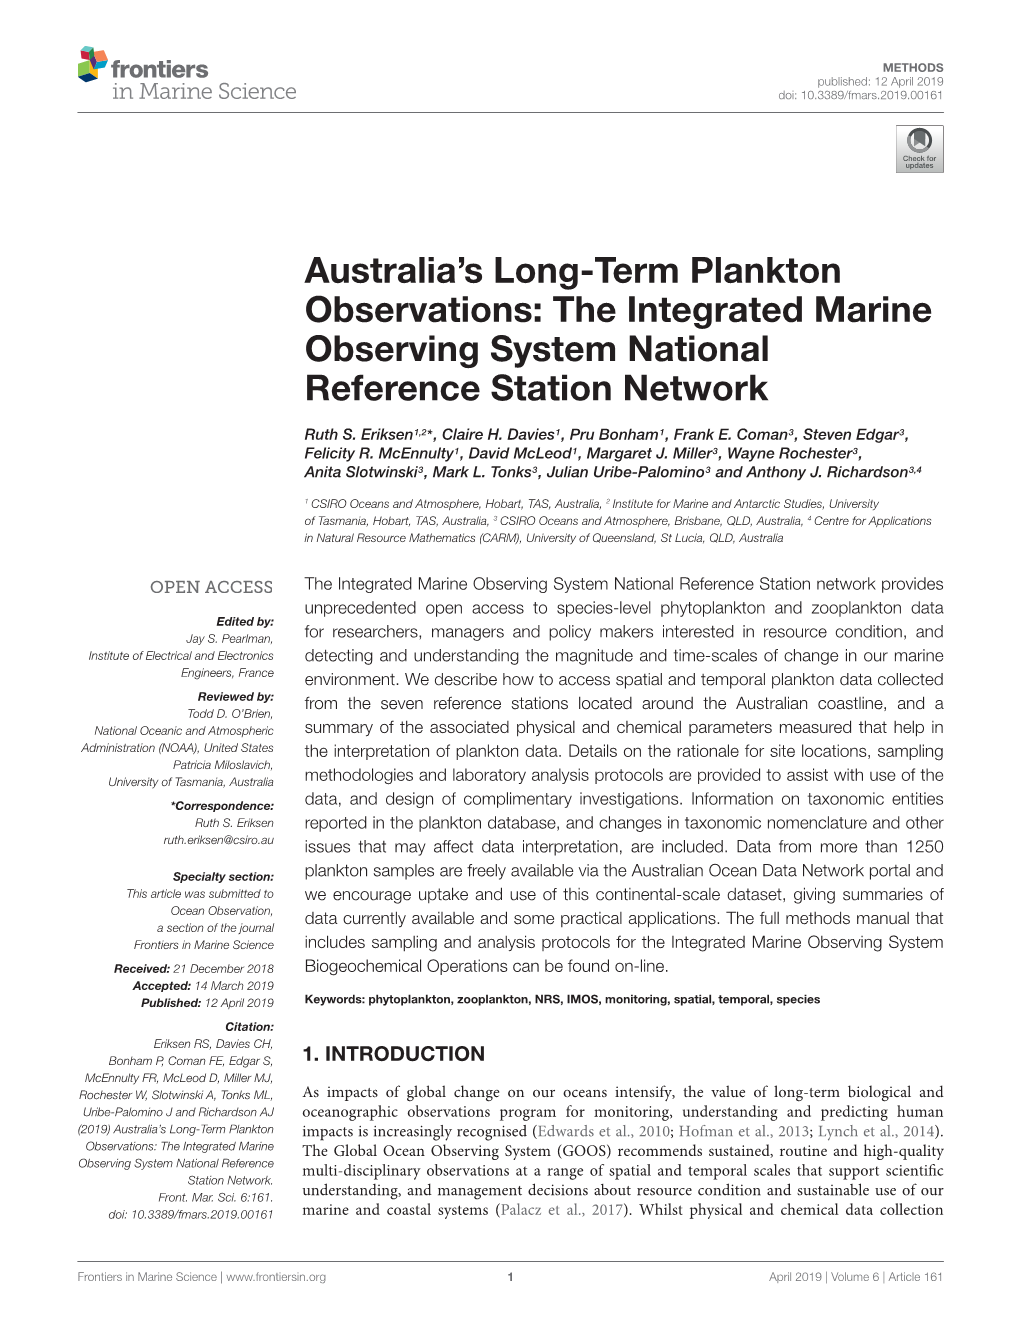 Australia's Long-Term Plankton Observations: the Integrated Marine Observing System National Reference Station Network